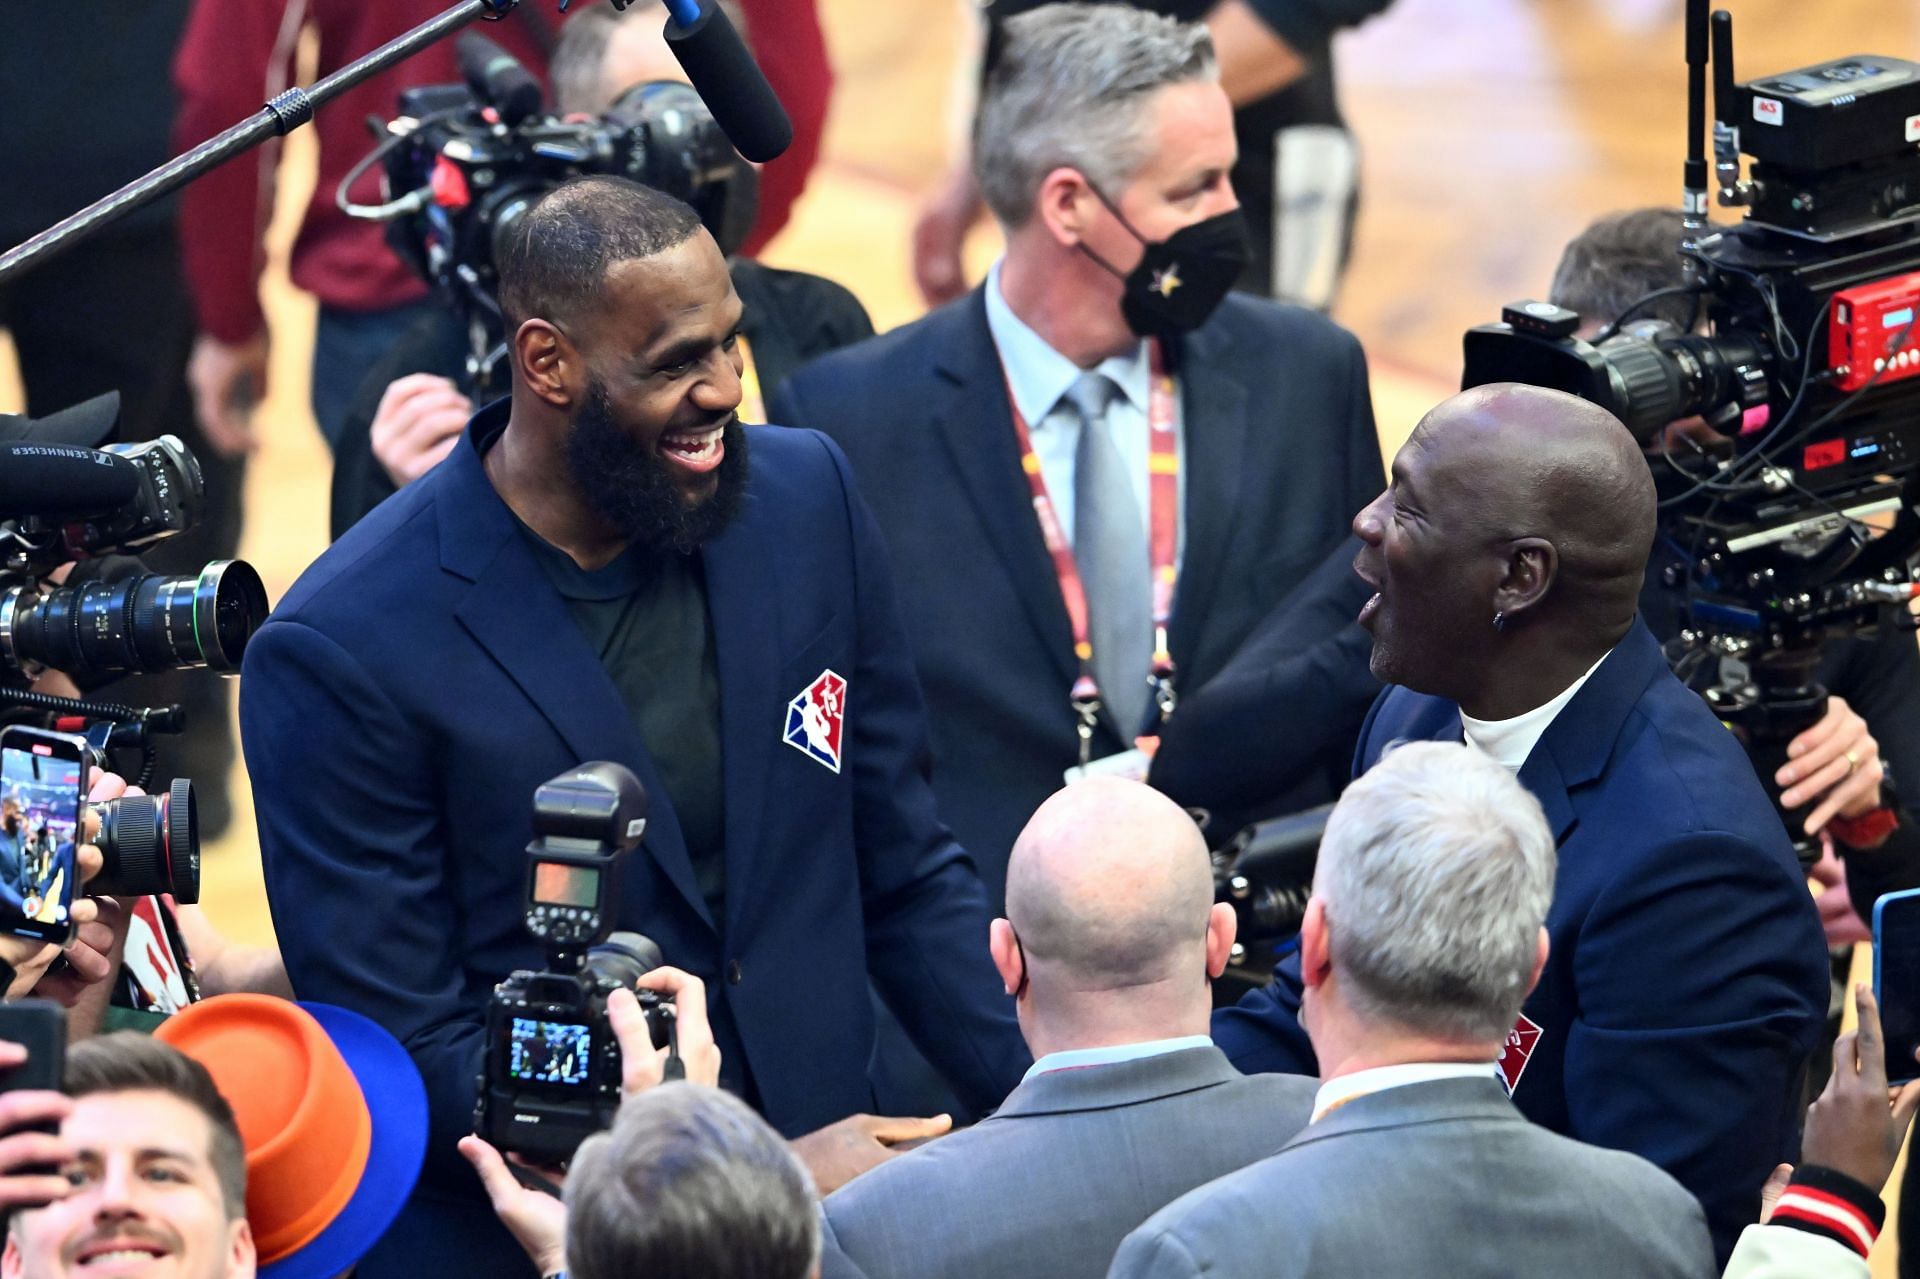 2022 NBA All-Star Game; LeBron James, left, and Michael Jordan laughing together